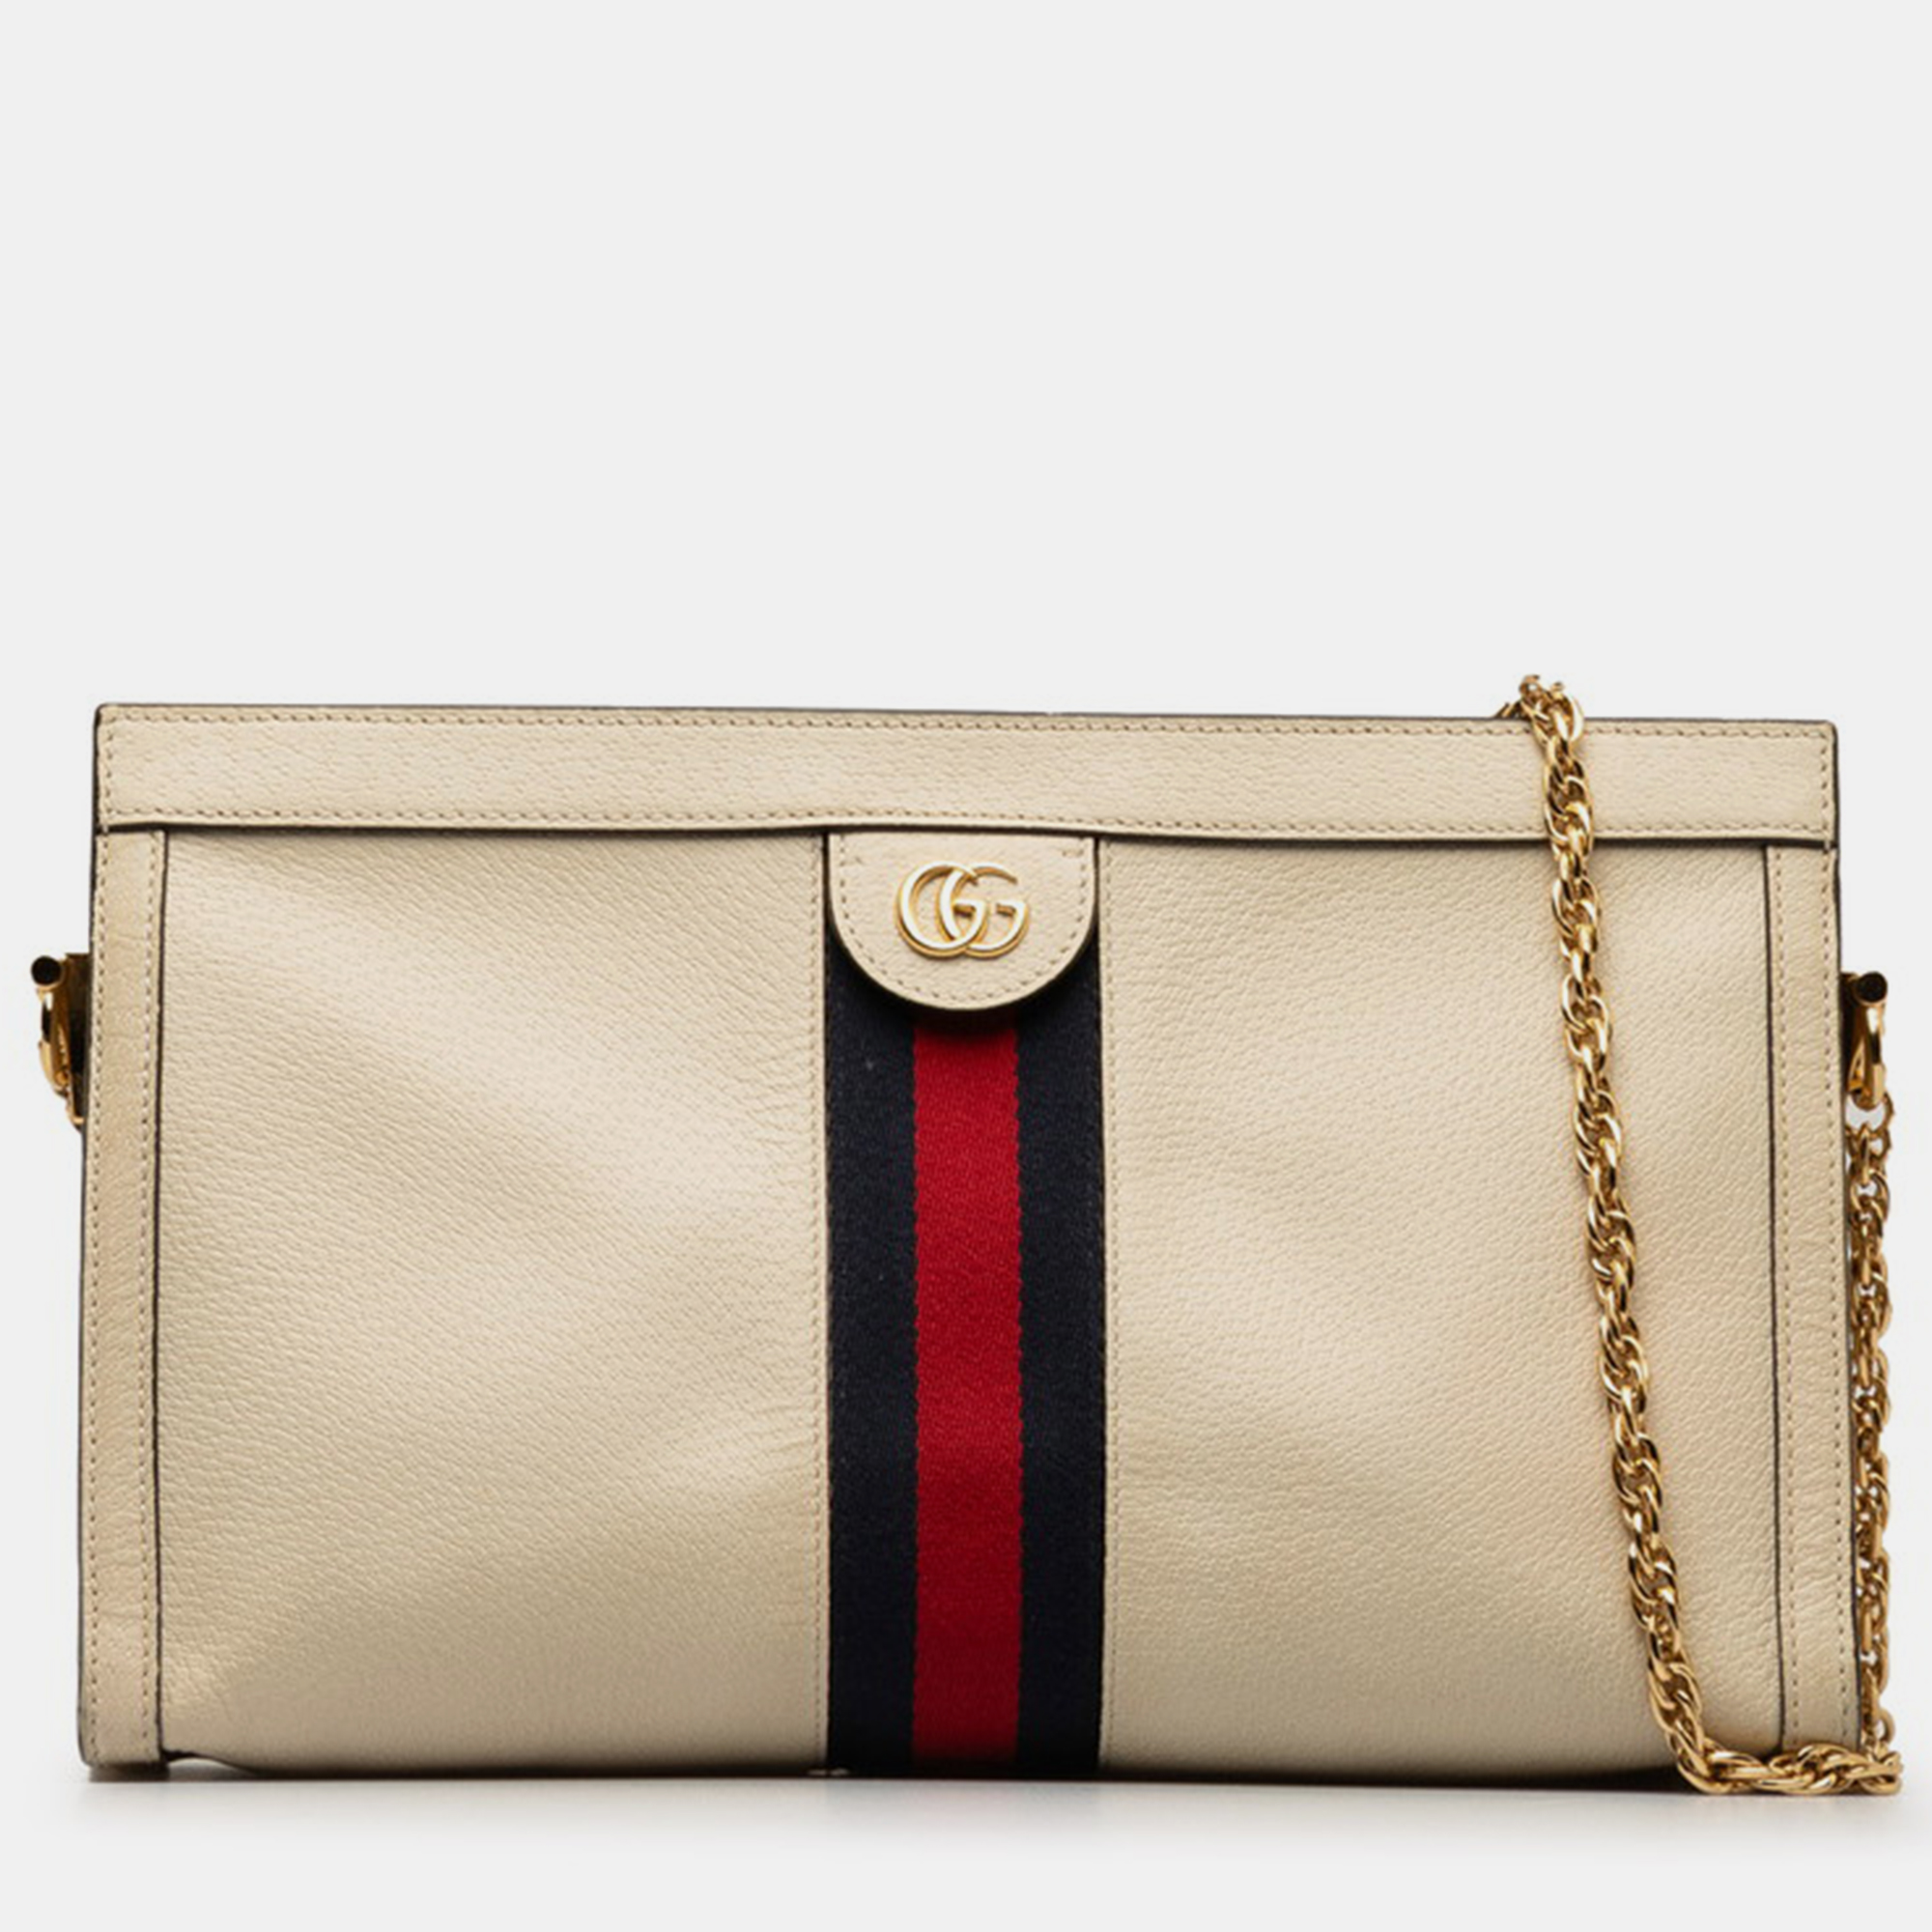 Gucci white leather ophidia chain shoulder bag